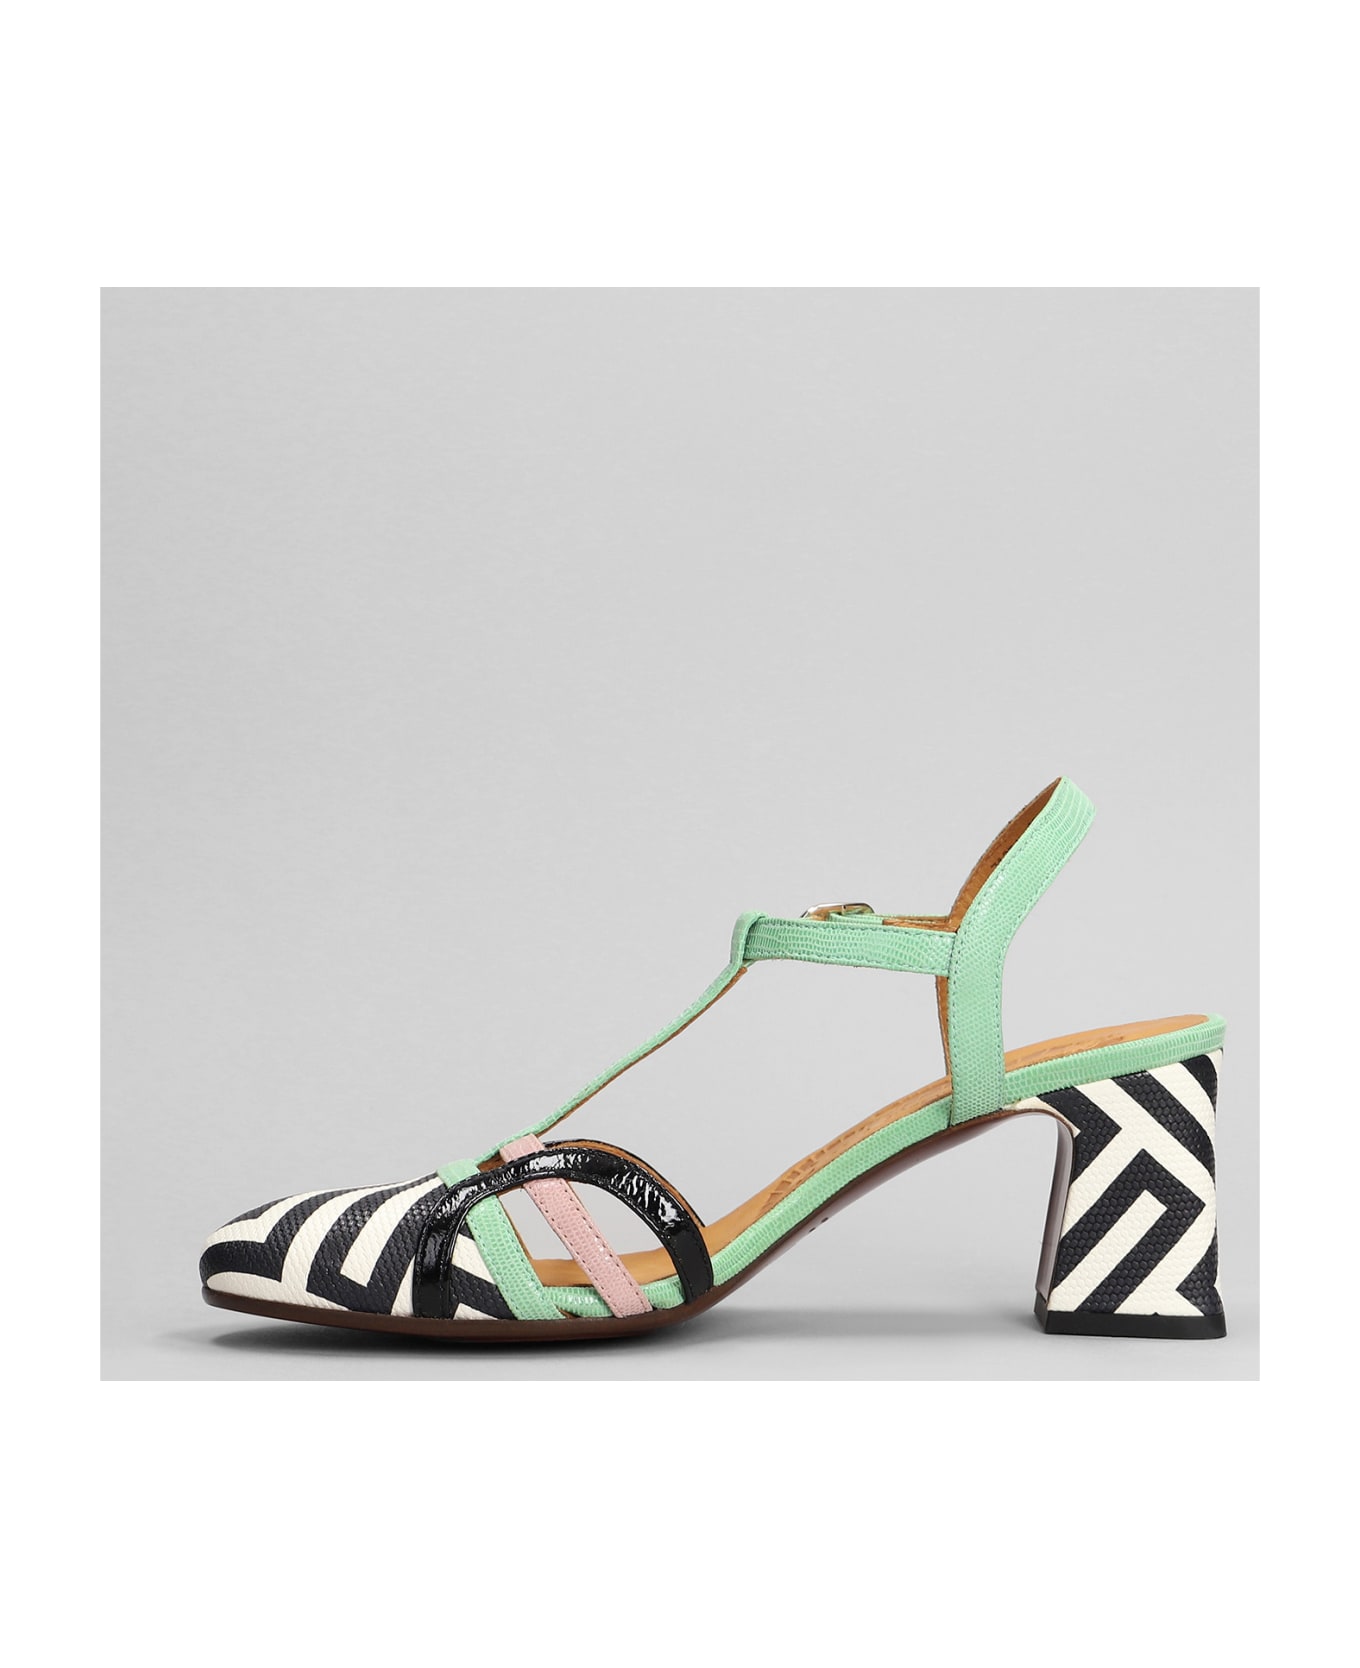 Chie Mihara Fendy Pumps In Green Leather - green サンダル